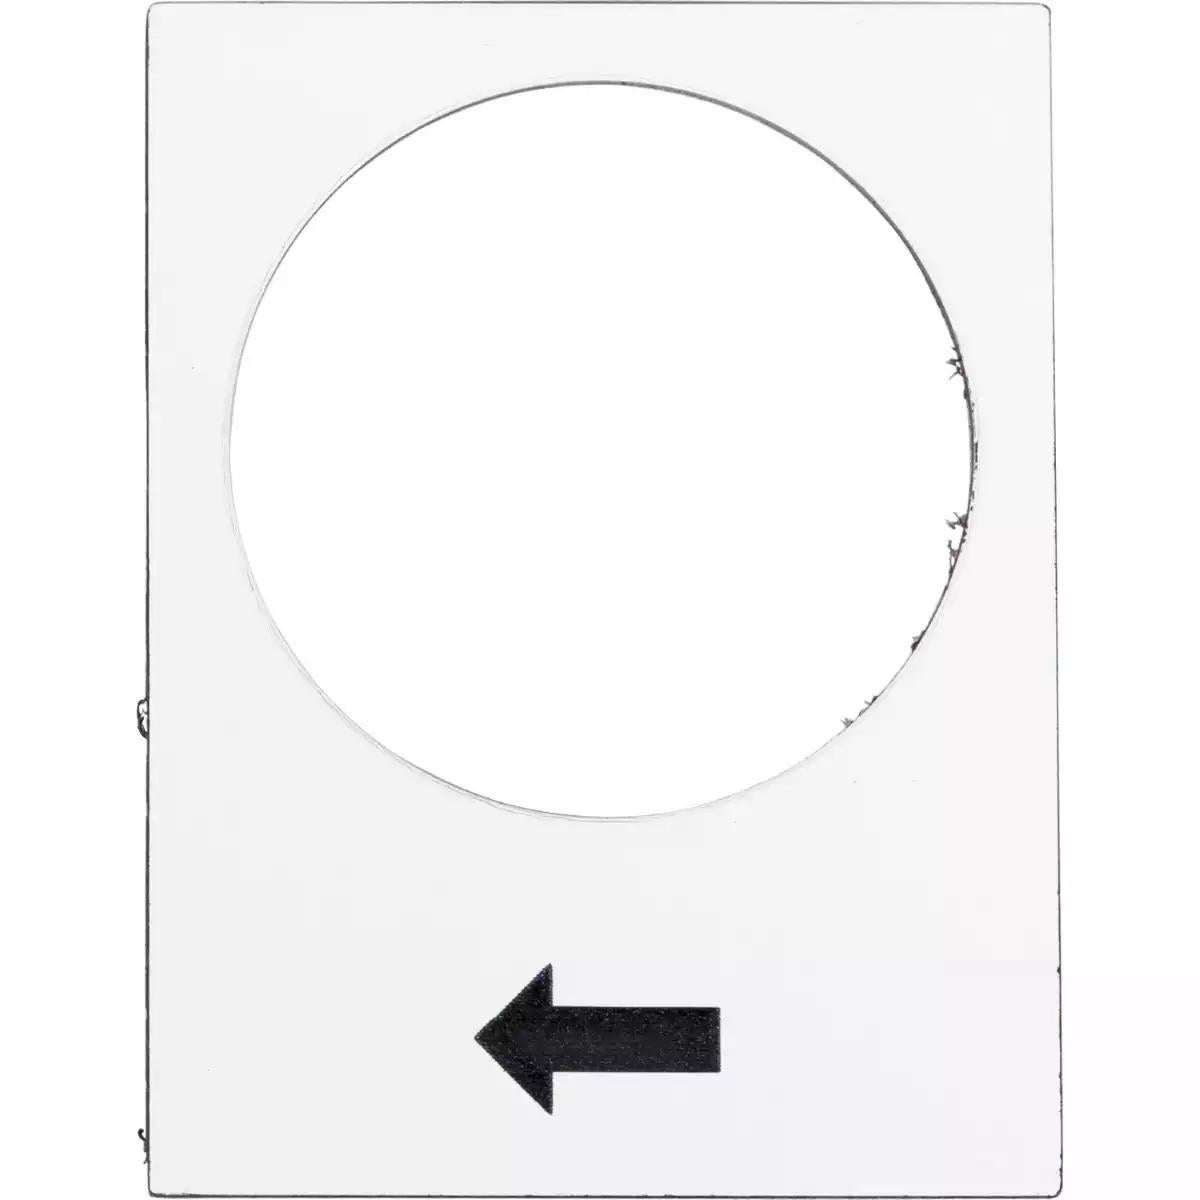 Harmony XAC, Marked Legend, Nameplate, 30 x 40mm, Plastic, White, 22mm Push Button, Black Marked Arrow